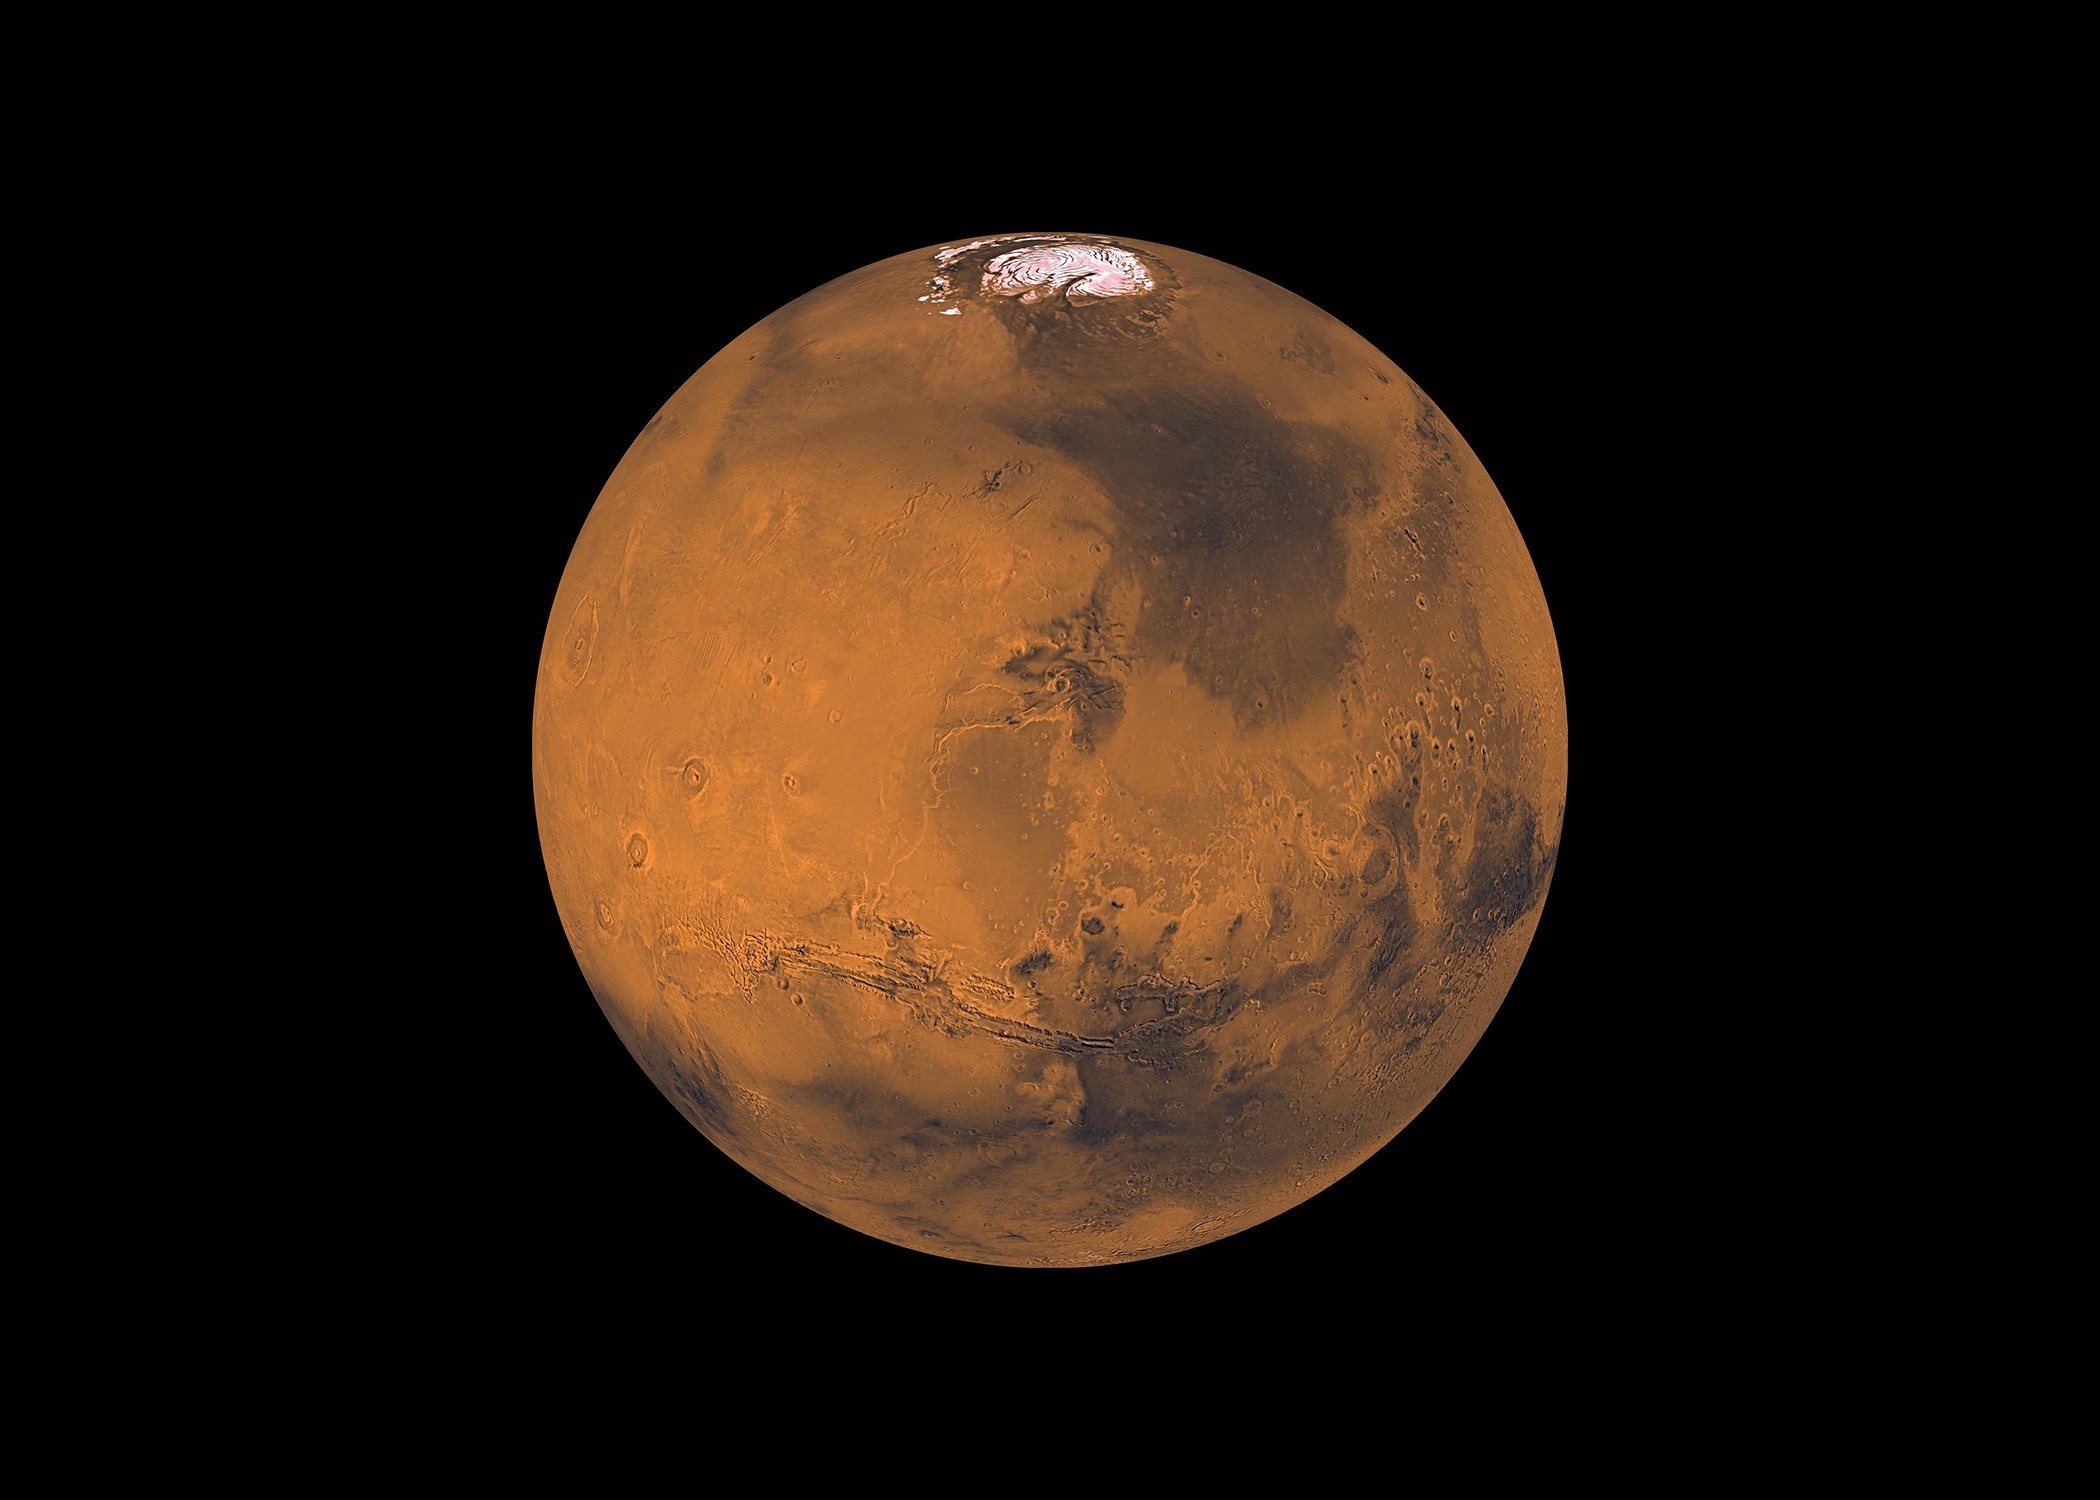 Houston We Have a Podcast: Ep. 279: Mars Ep. 9: Welcome to Mars